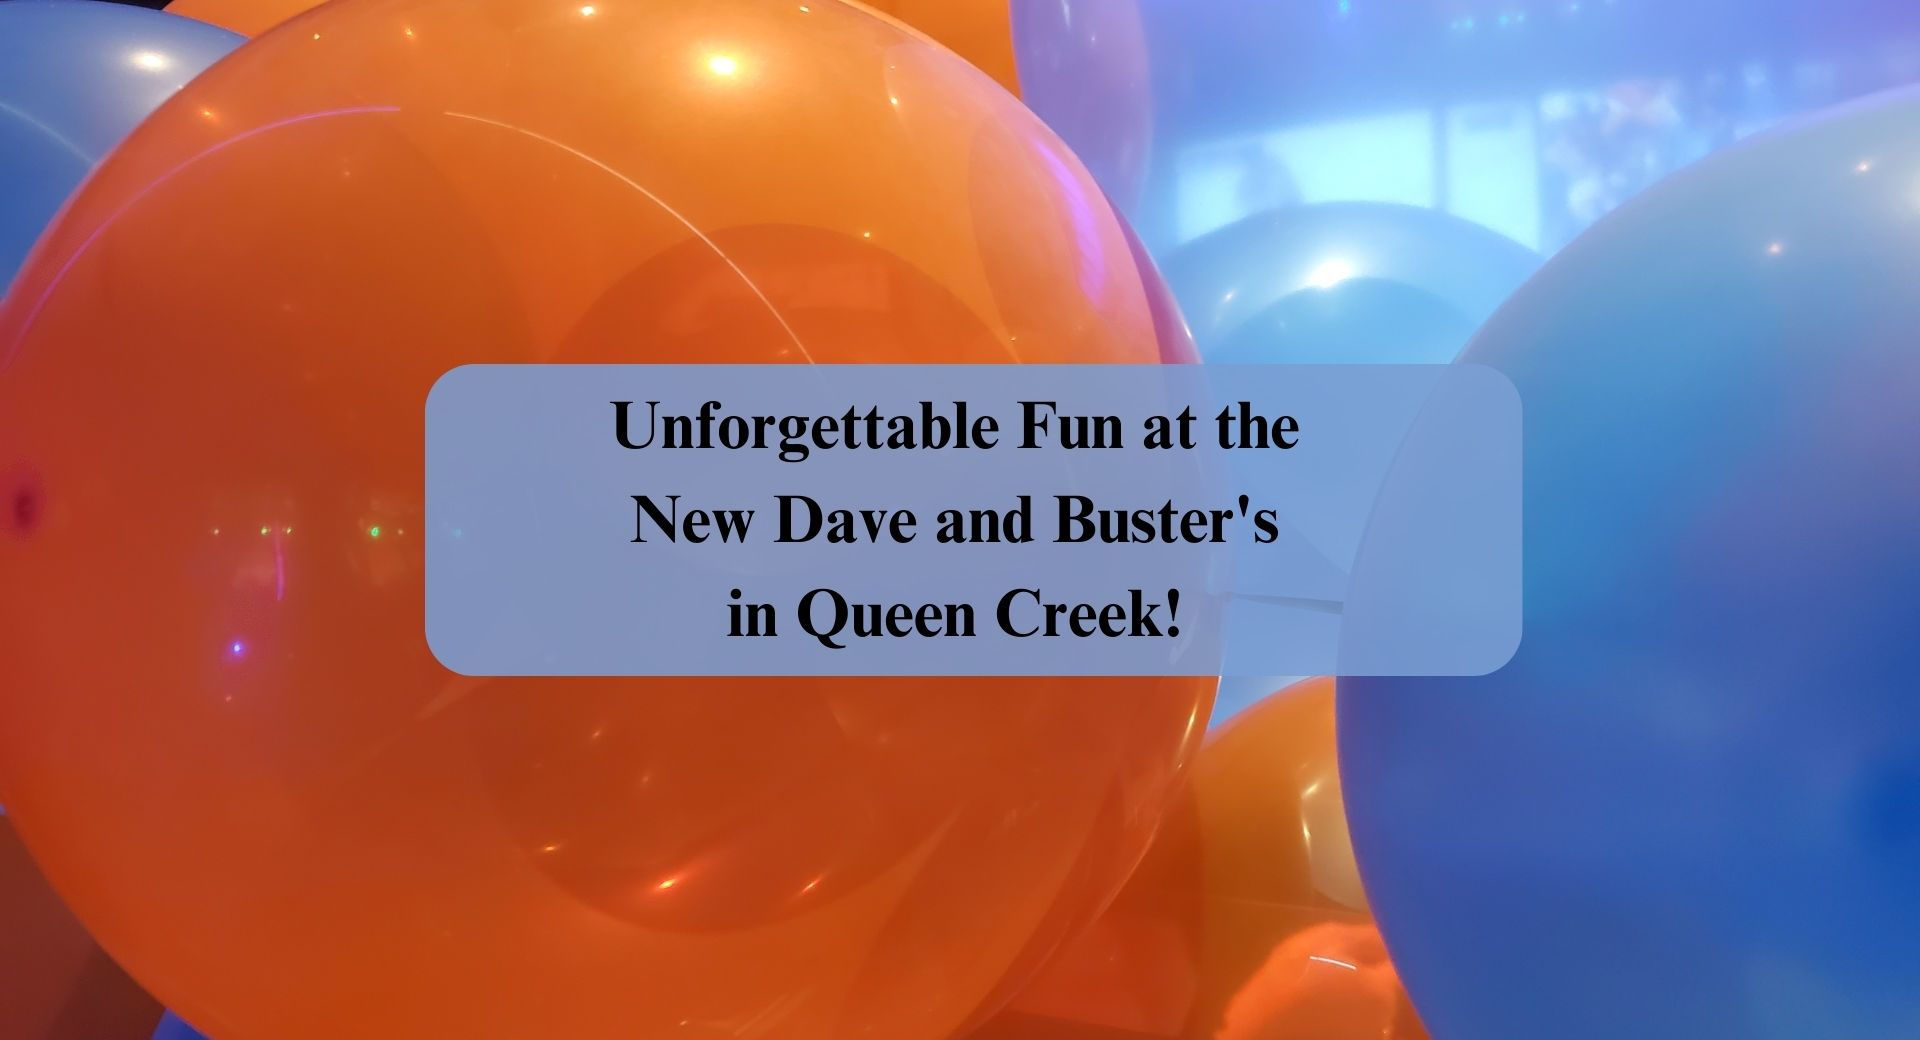 Unforgettable Fun at the New Dave and Buster's in Queen Creek!